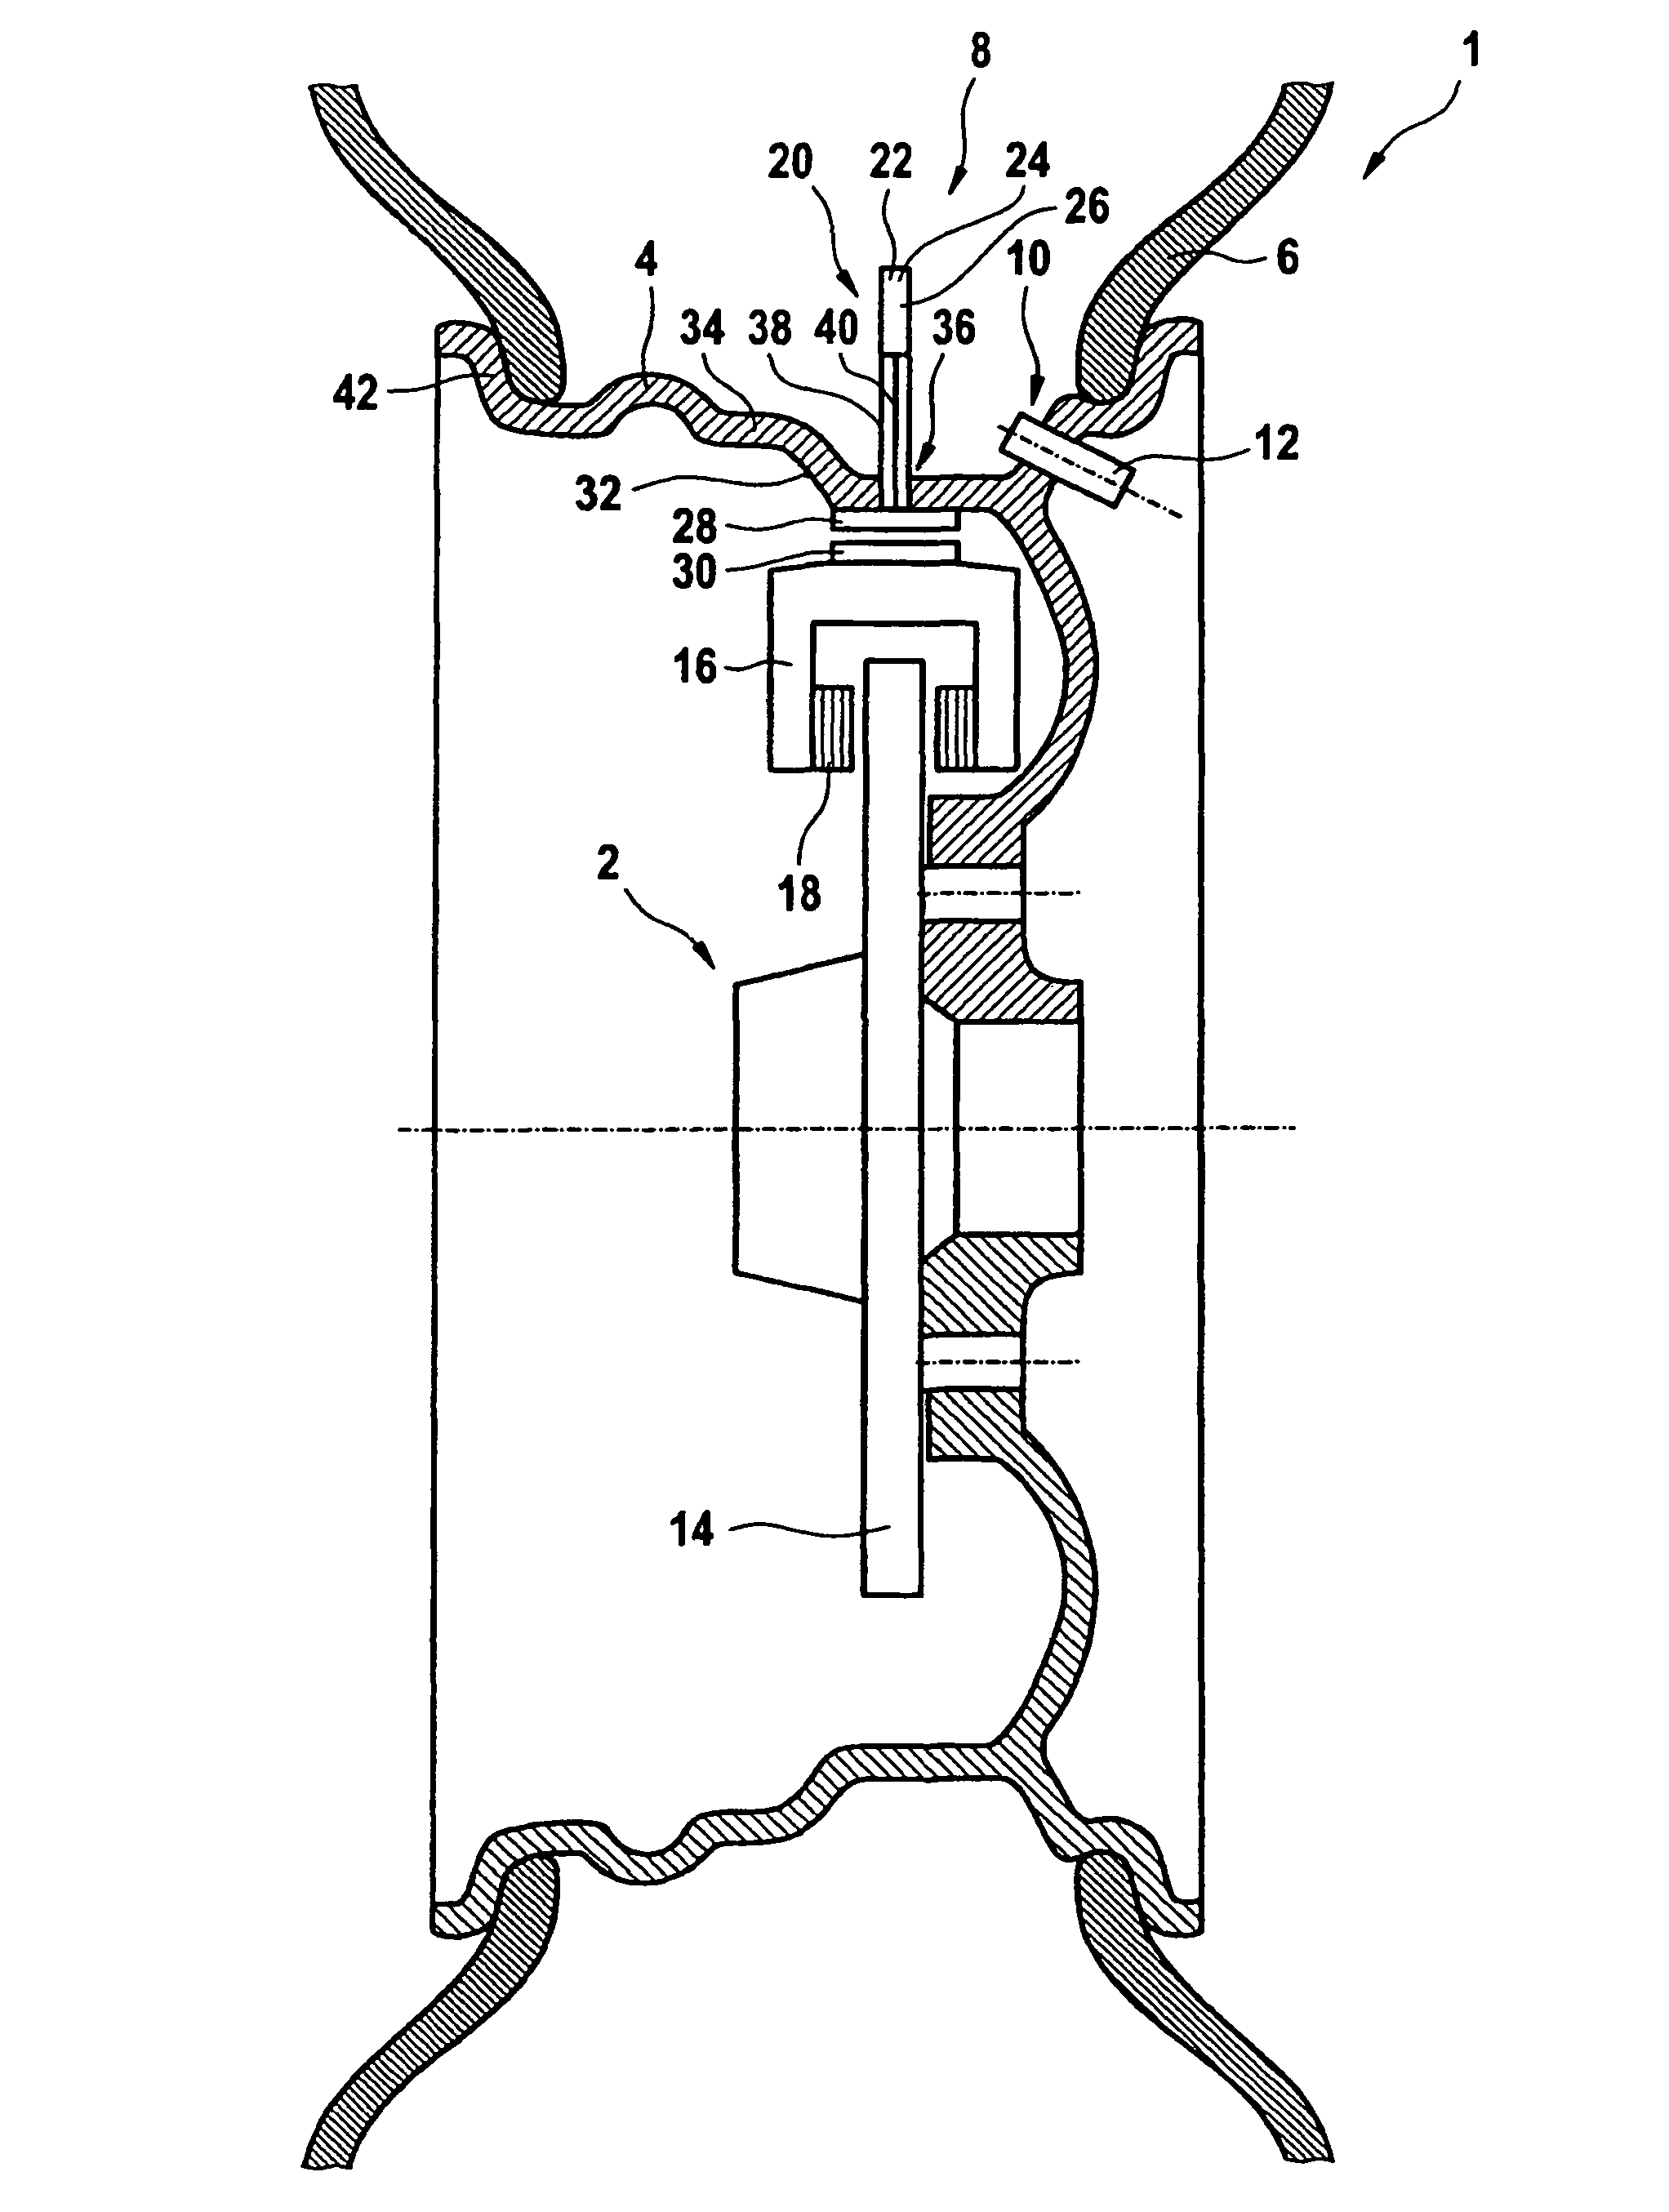 Tire pressure monitoring device having power supplied by magnetic induction